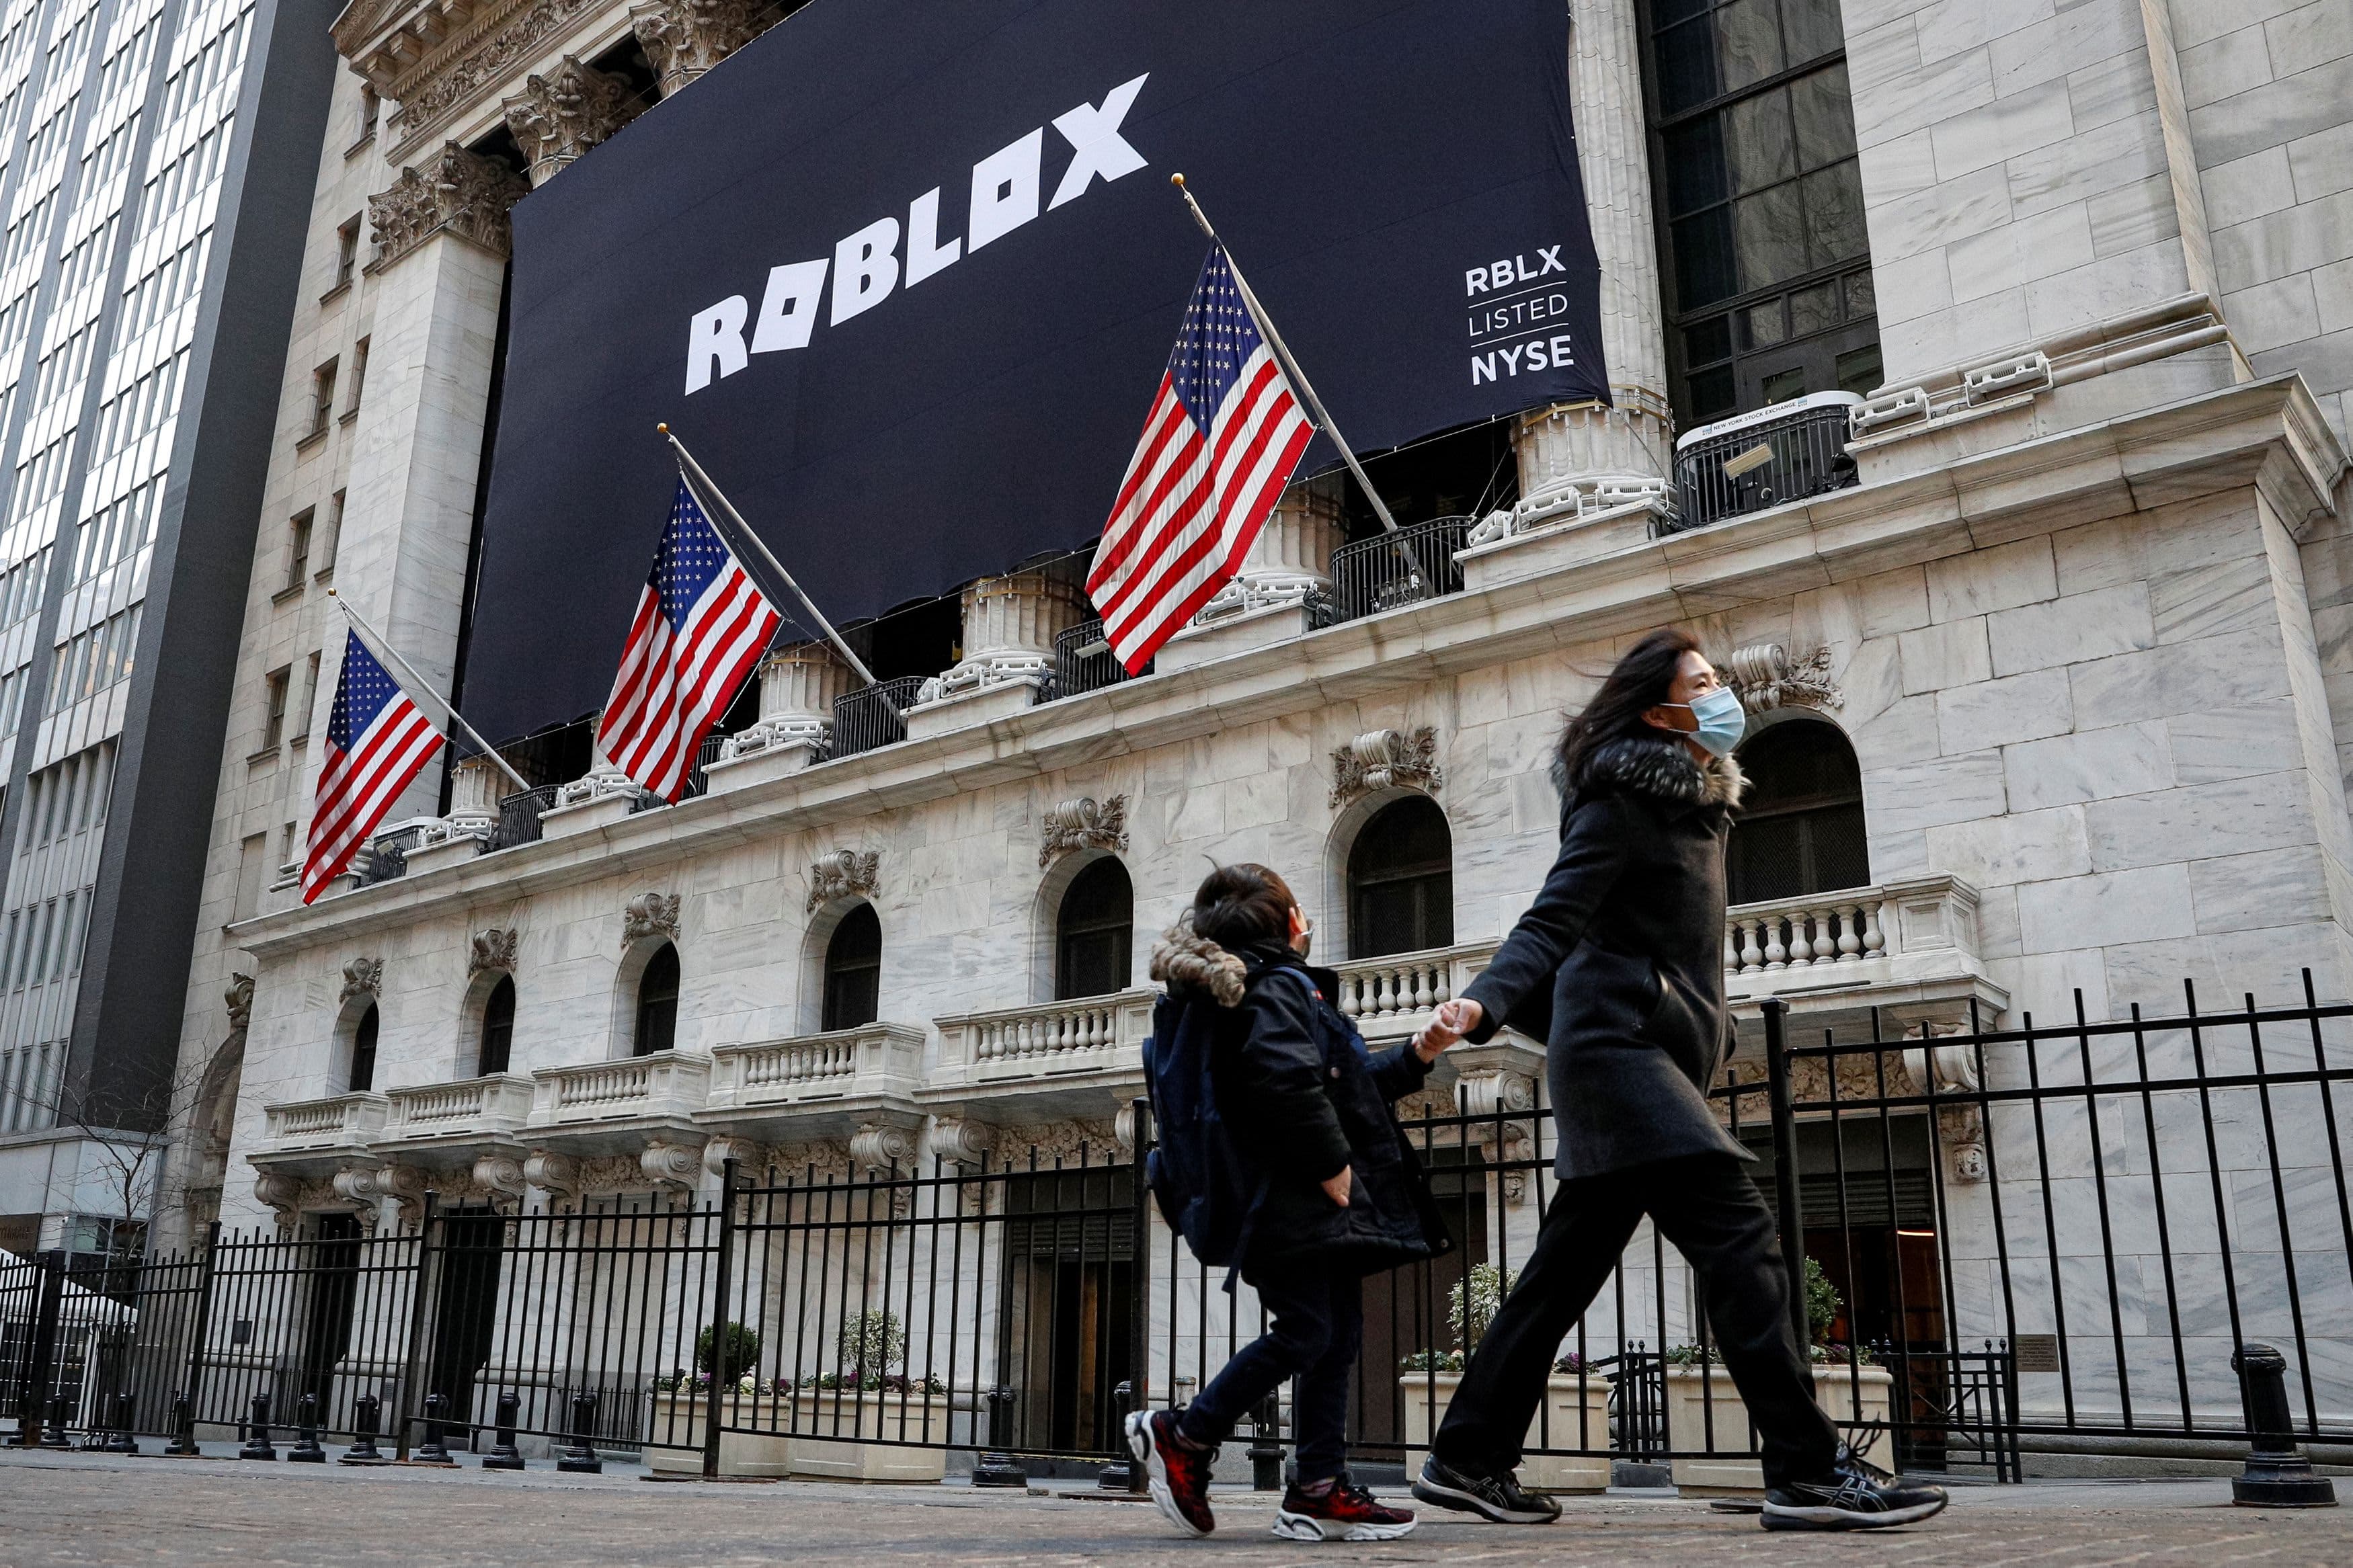 Roblox Plunges 22% on Disappointing Guidance, Overshadowing Q1 Beat